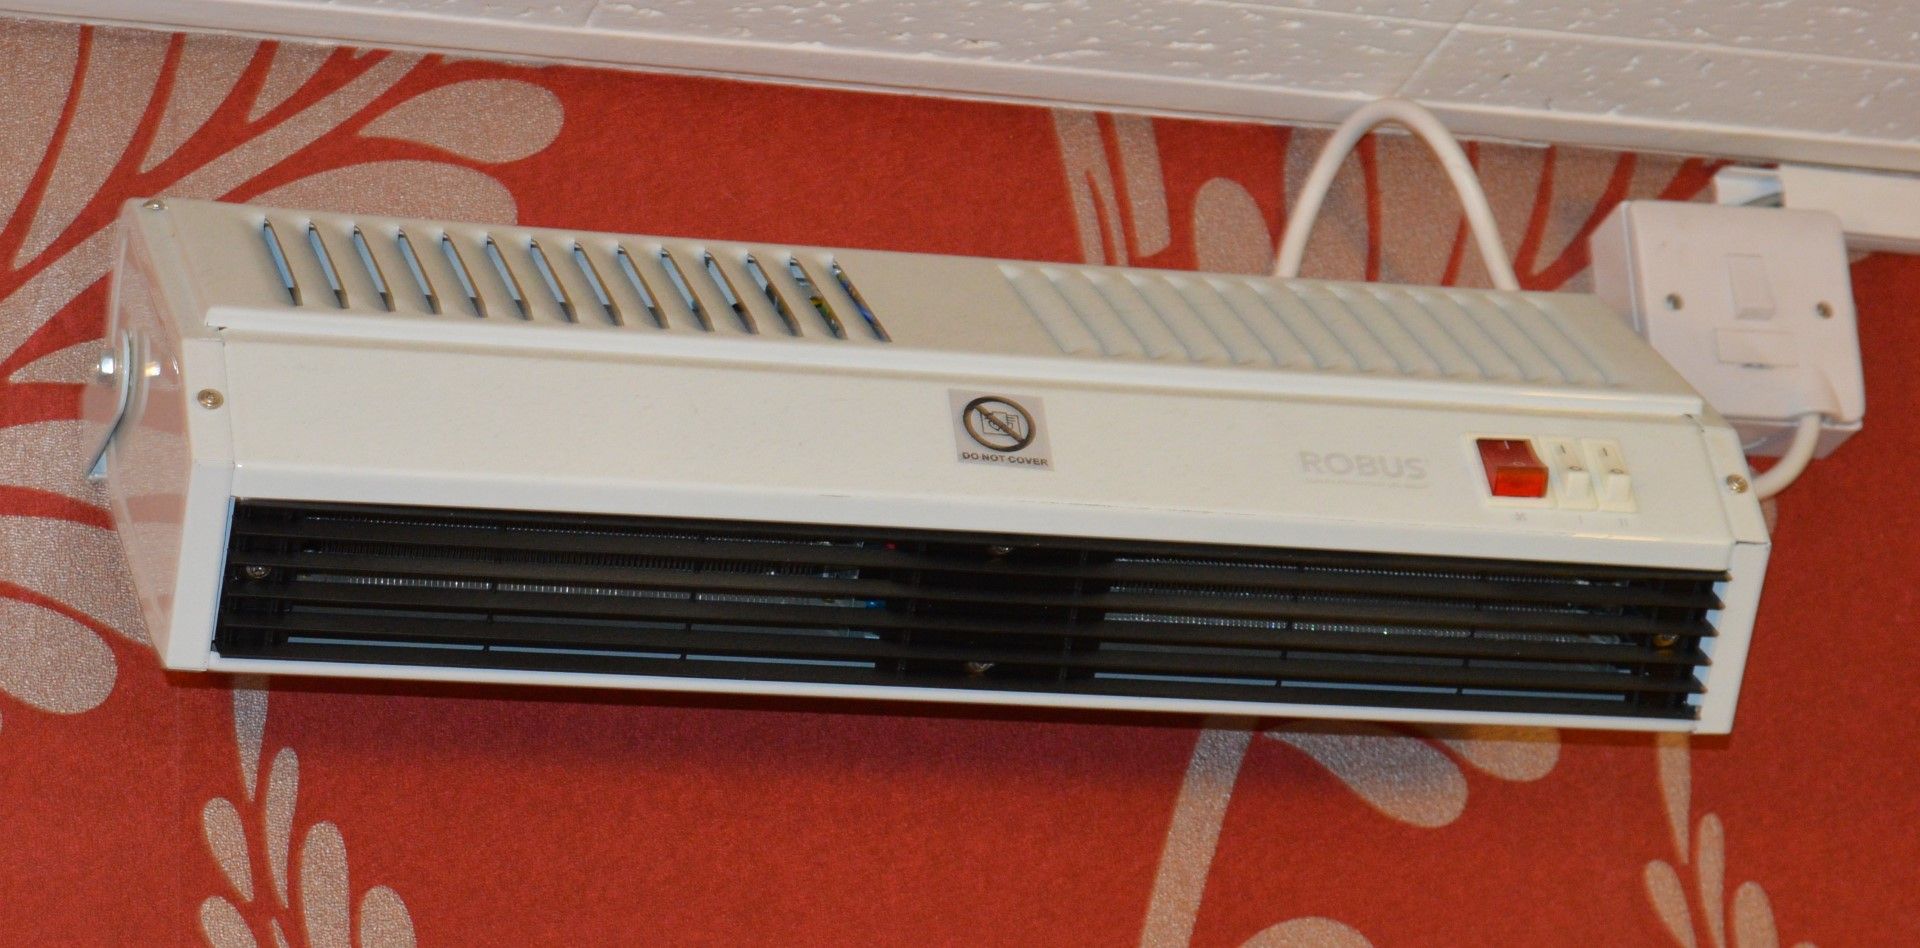 1 x Robus 3KW Air Curtain Heater - Perfect For Mounting Over Doors in Shops and Commercial